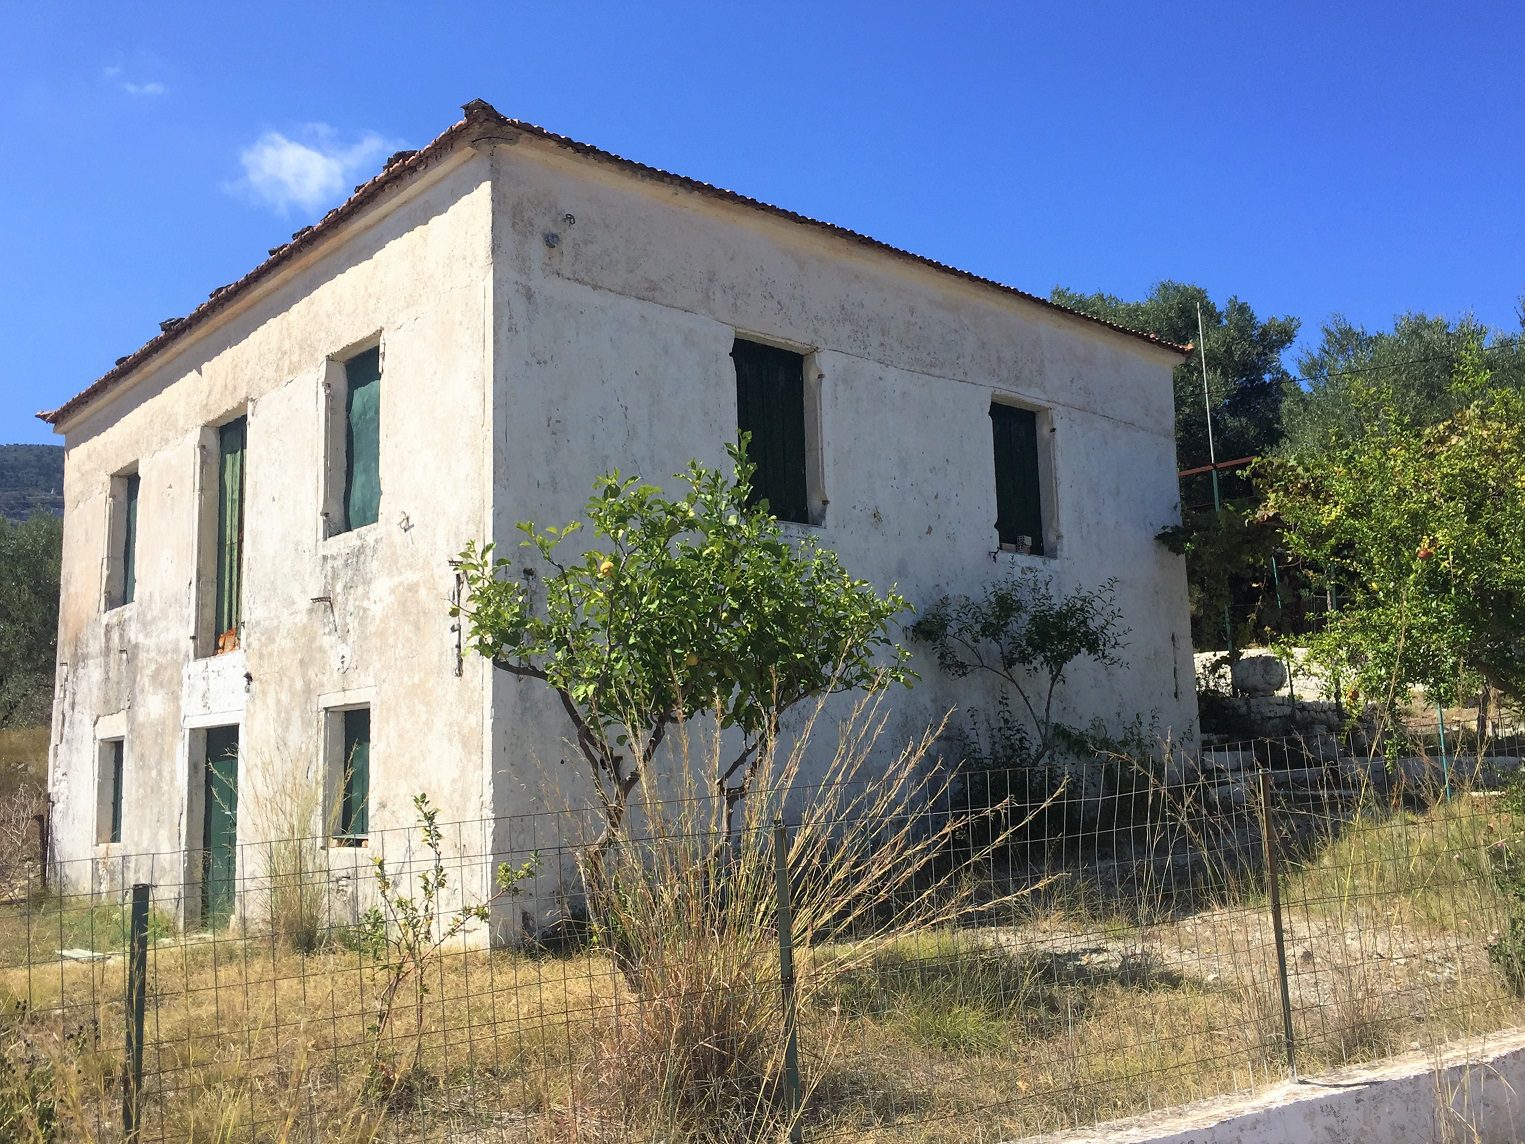 Sold: House in Lahos, Ithaca Greece